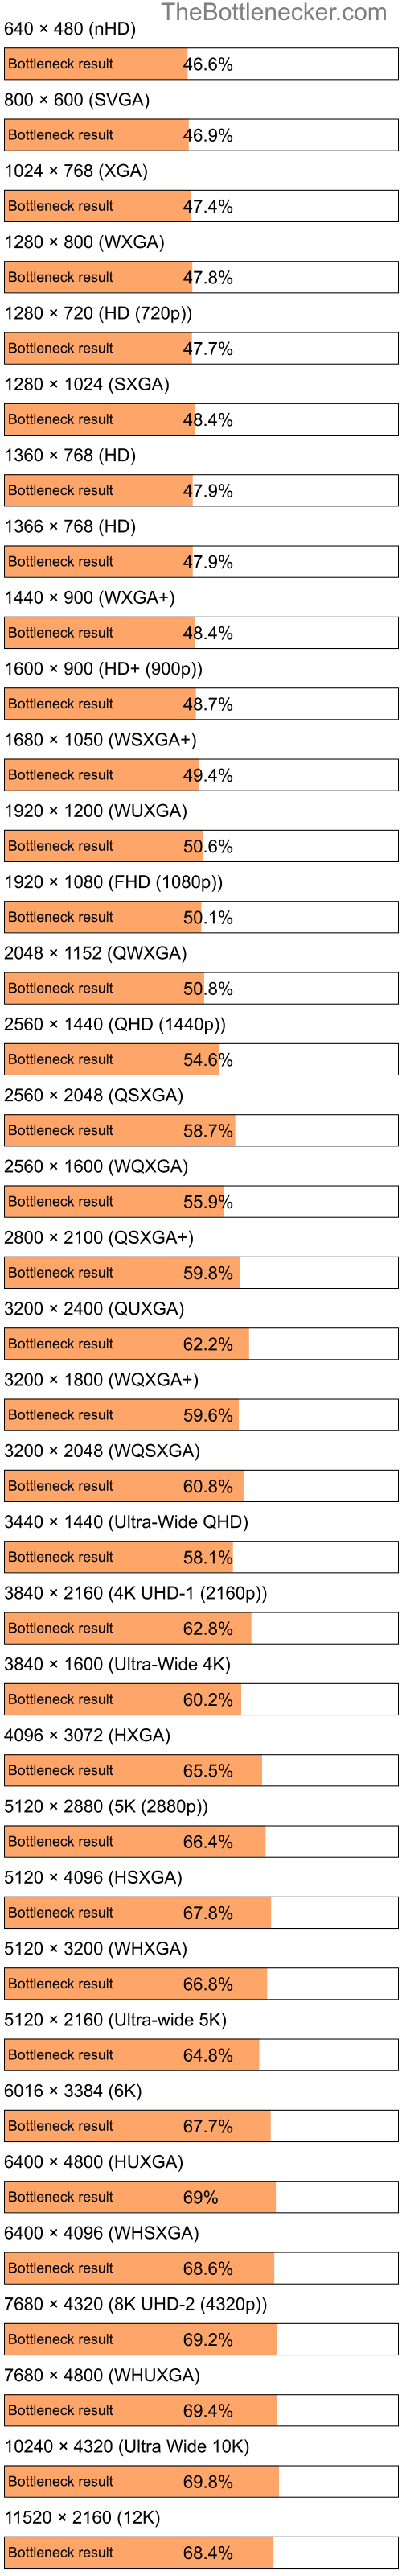 Bottleneck results by resolution for Intel Pentium 4 and AMD M880G with Mobility Radeon HD 4250 in Processor Intense Tasks